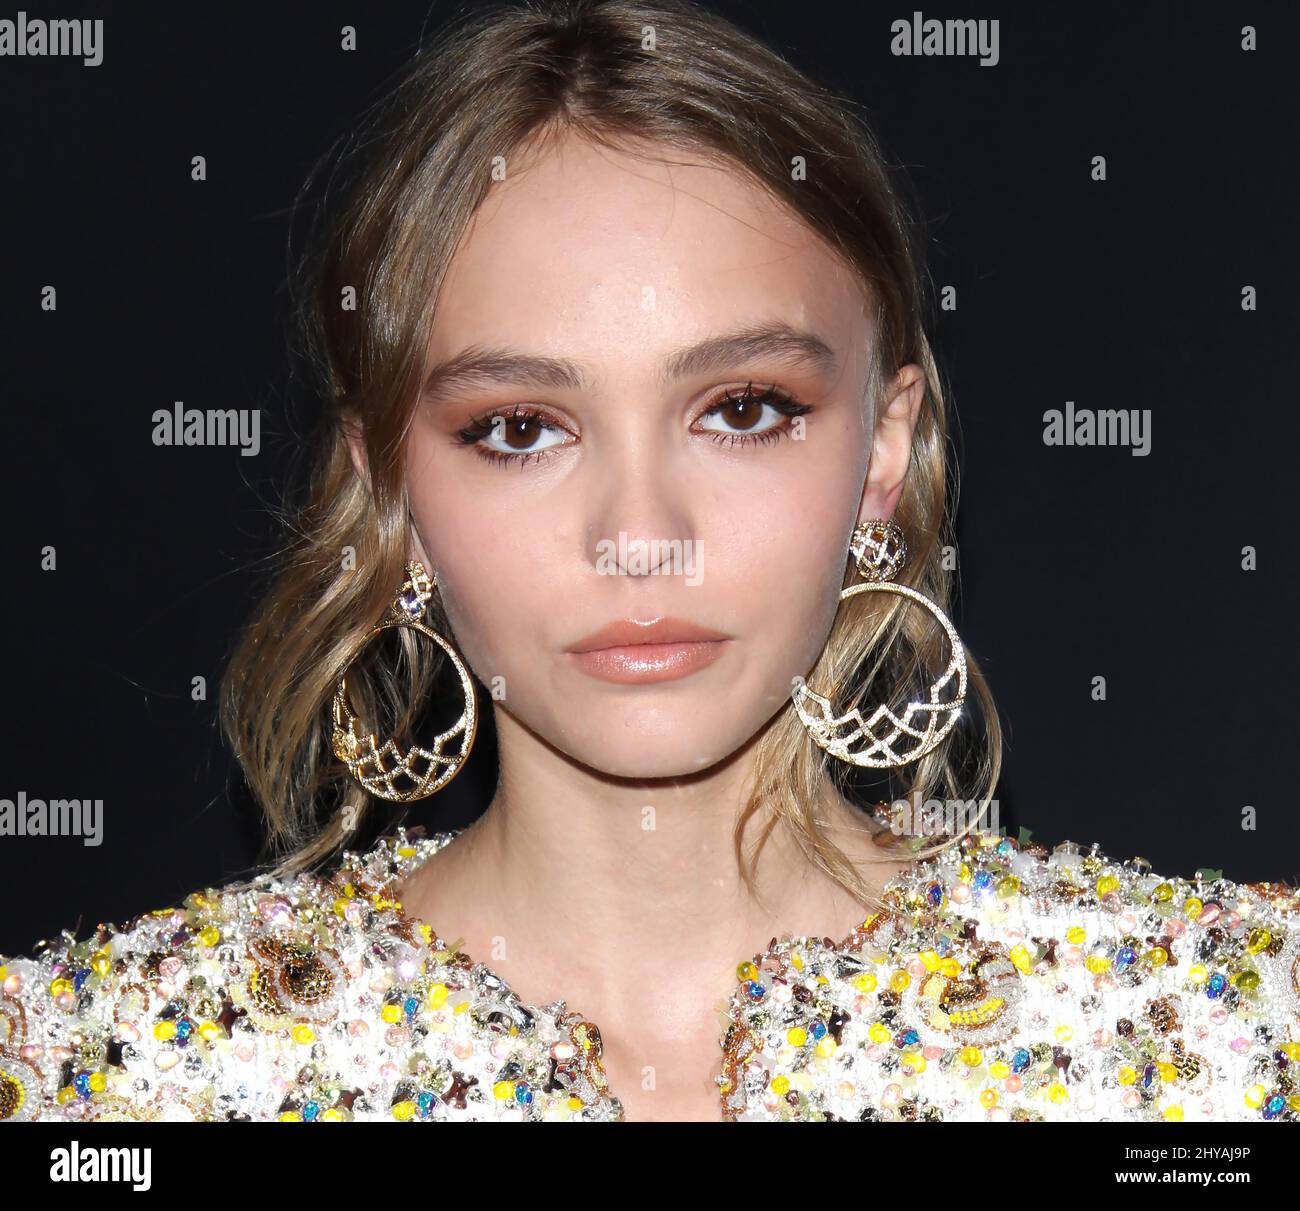 Chanel Celebrates Lily-Rose Depp and the Chanel No 5 L'eau